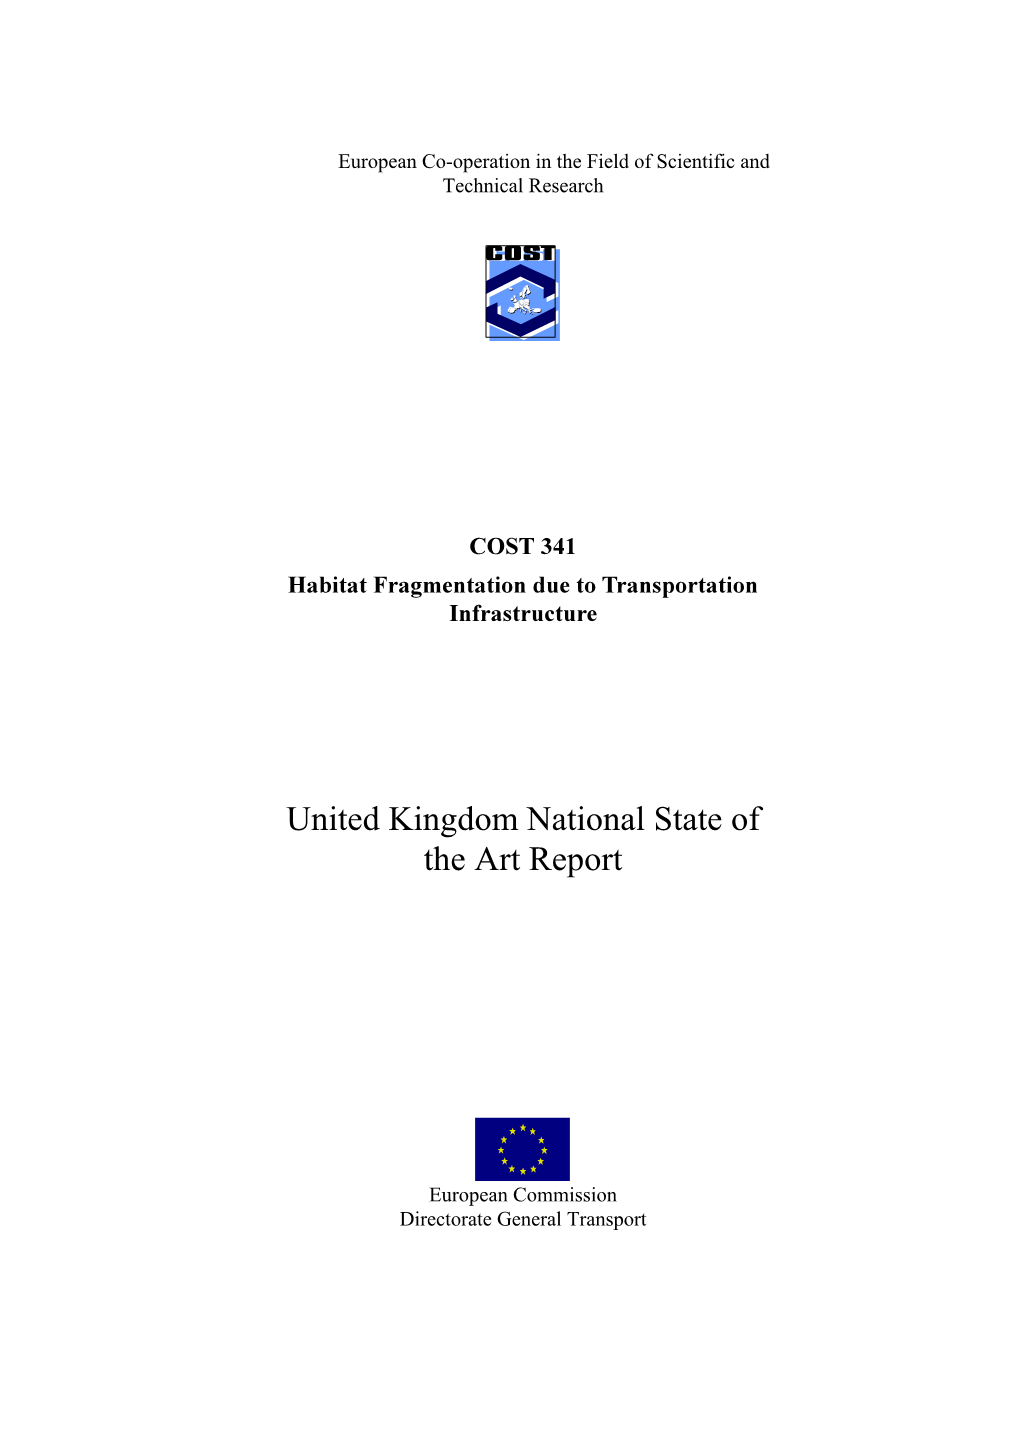 United Kingdom National State of the Art Report